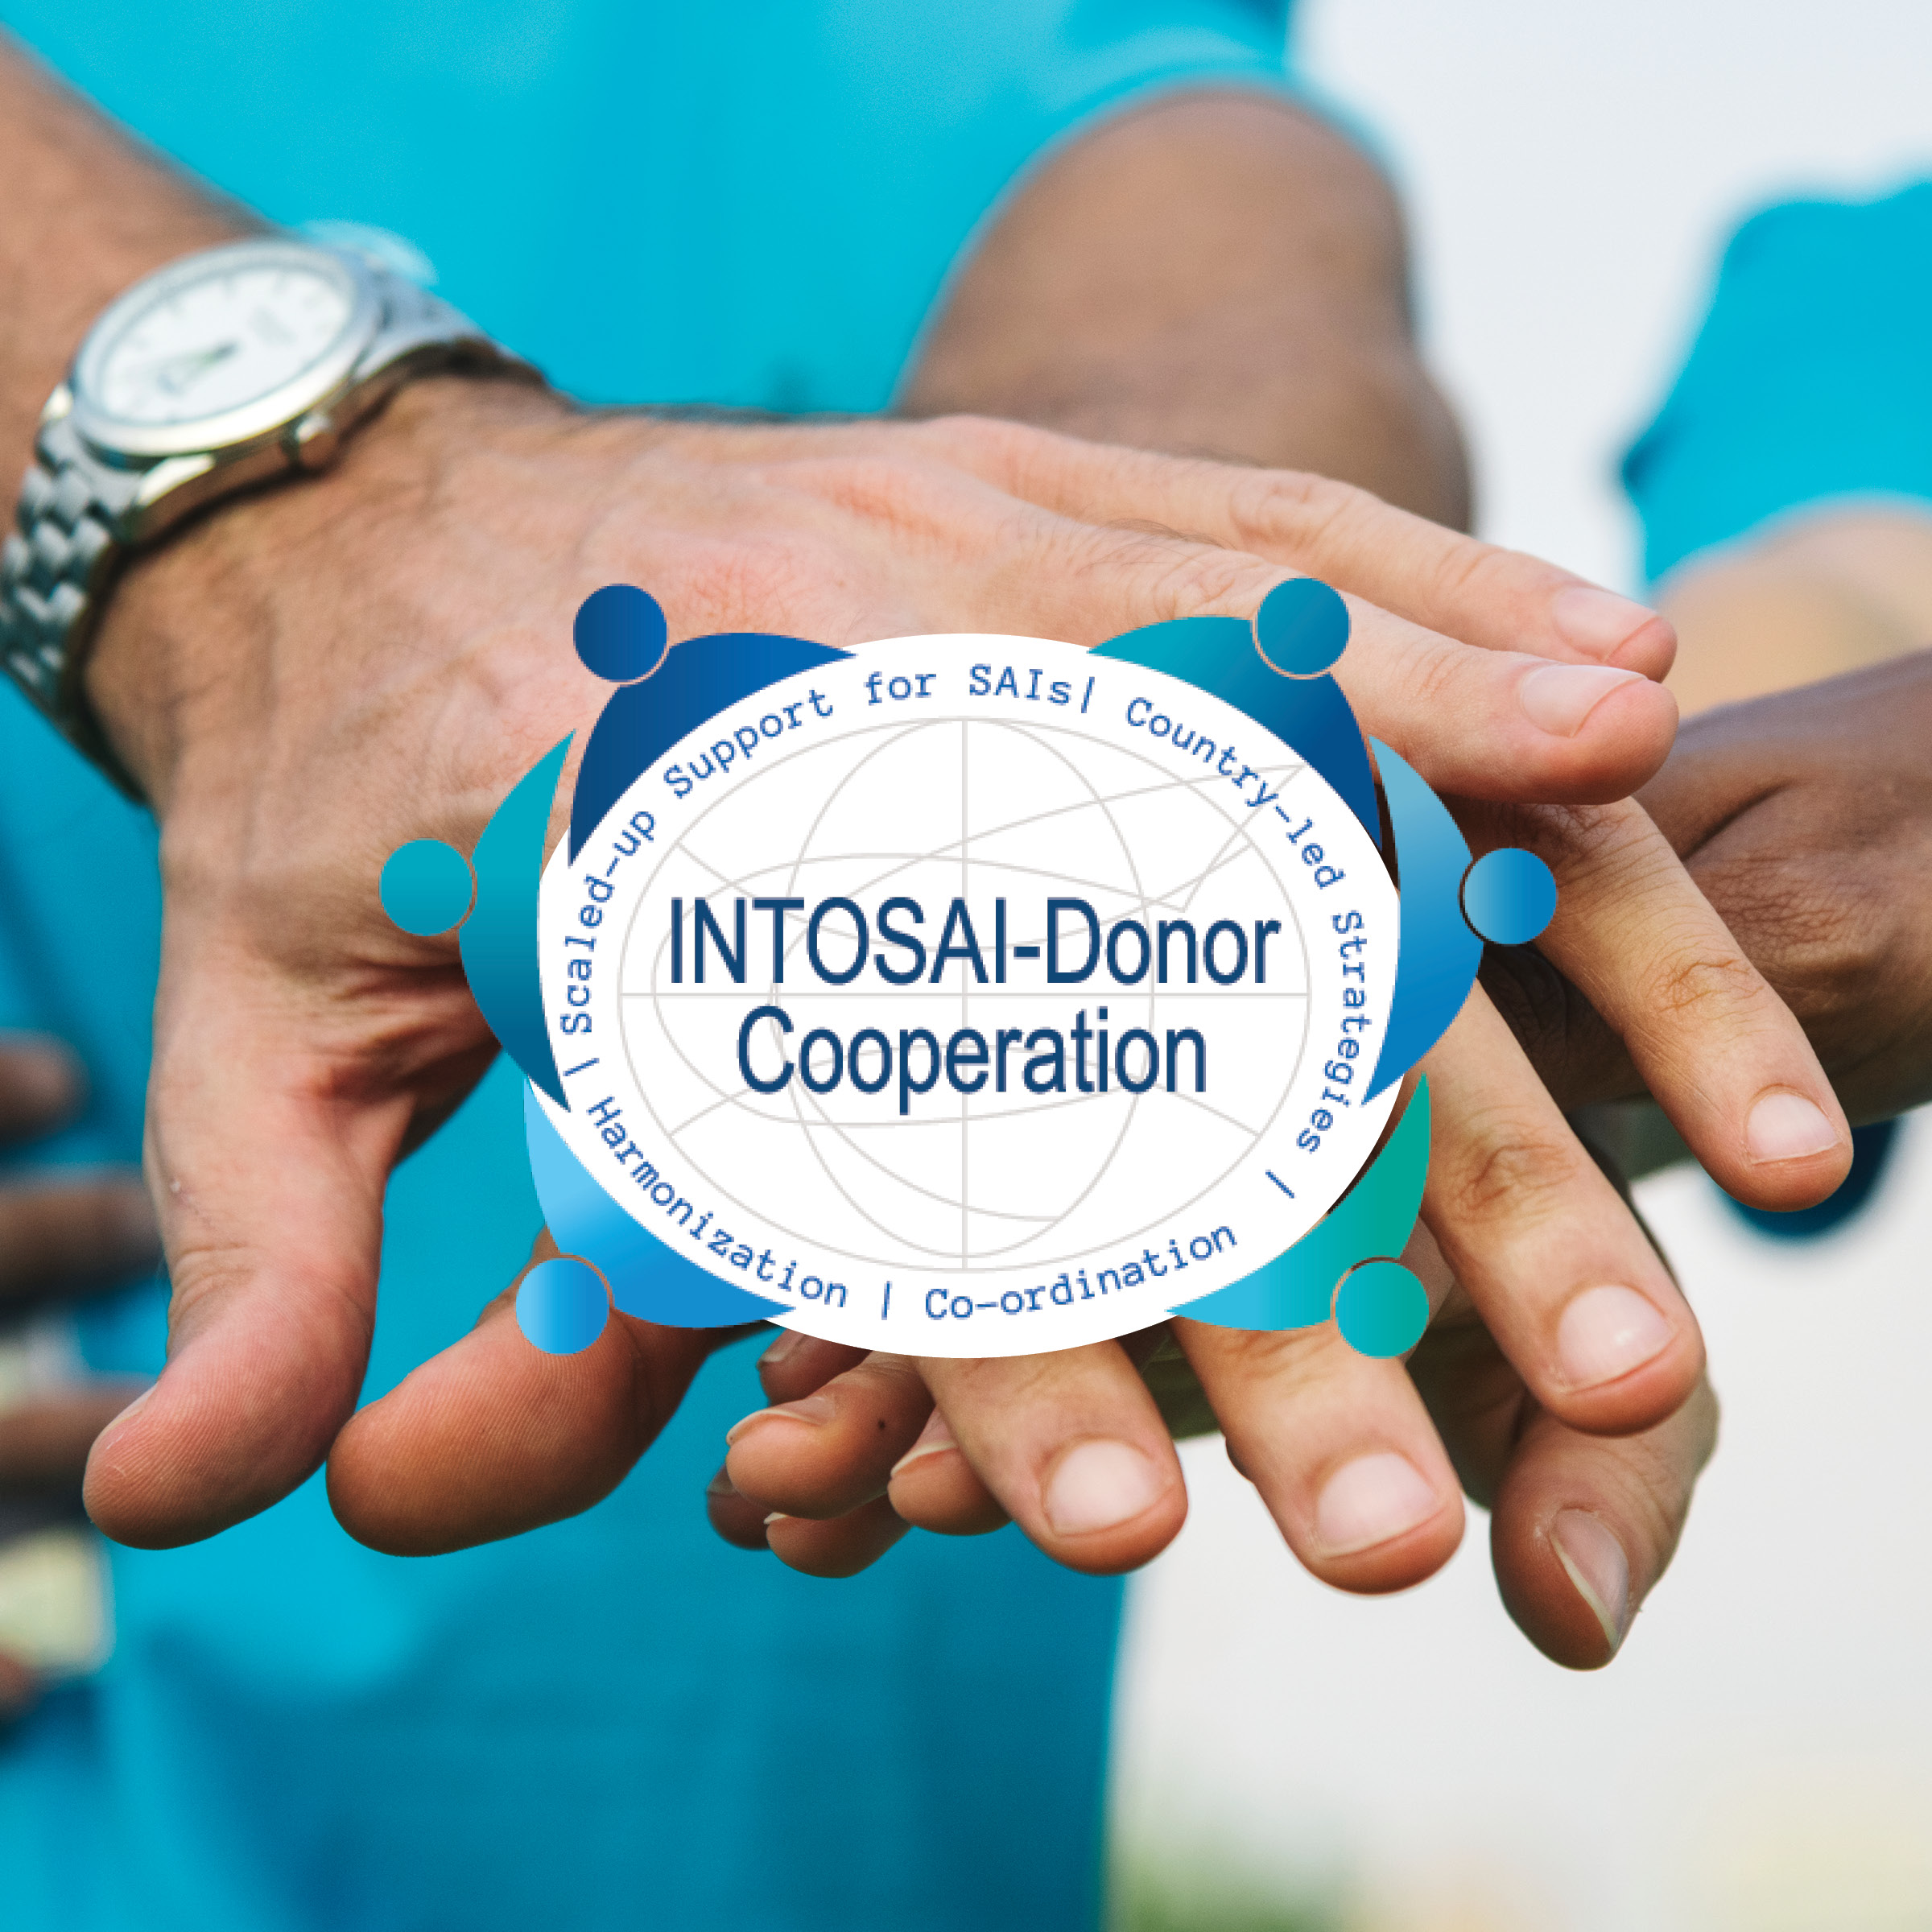 INTOSAI-Donor Cooperation